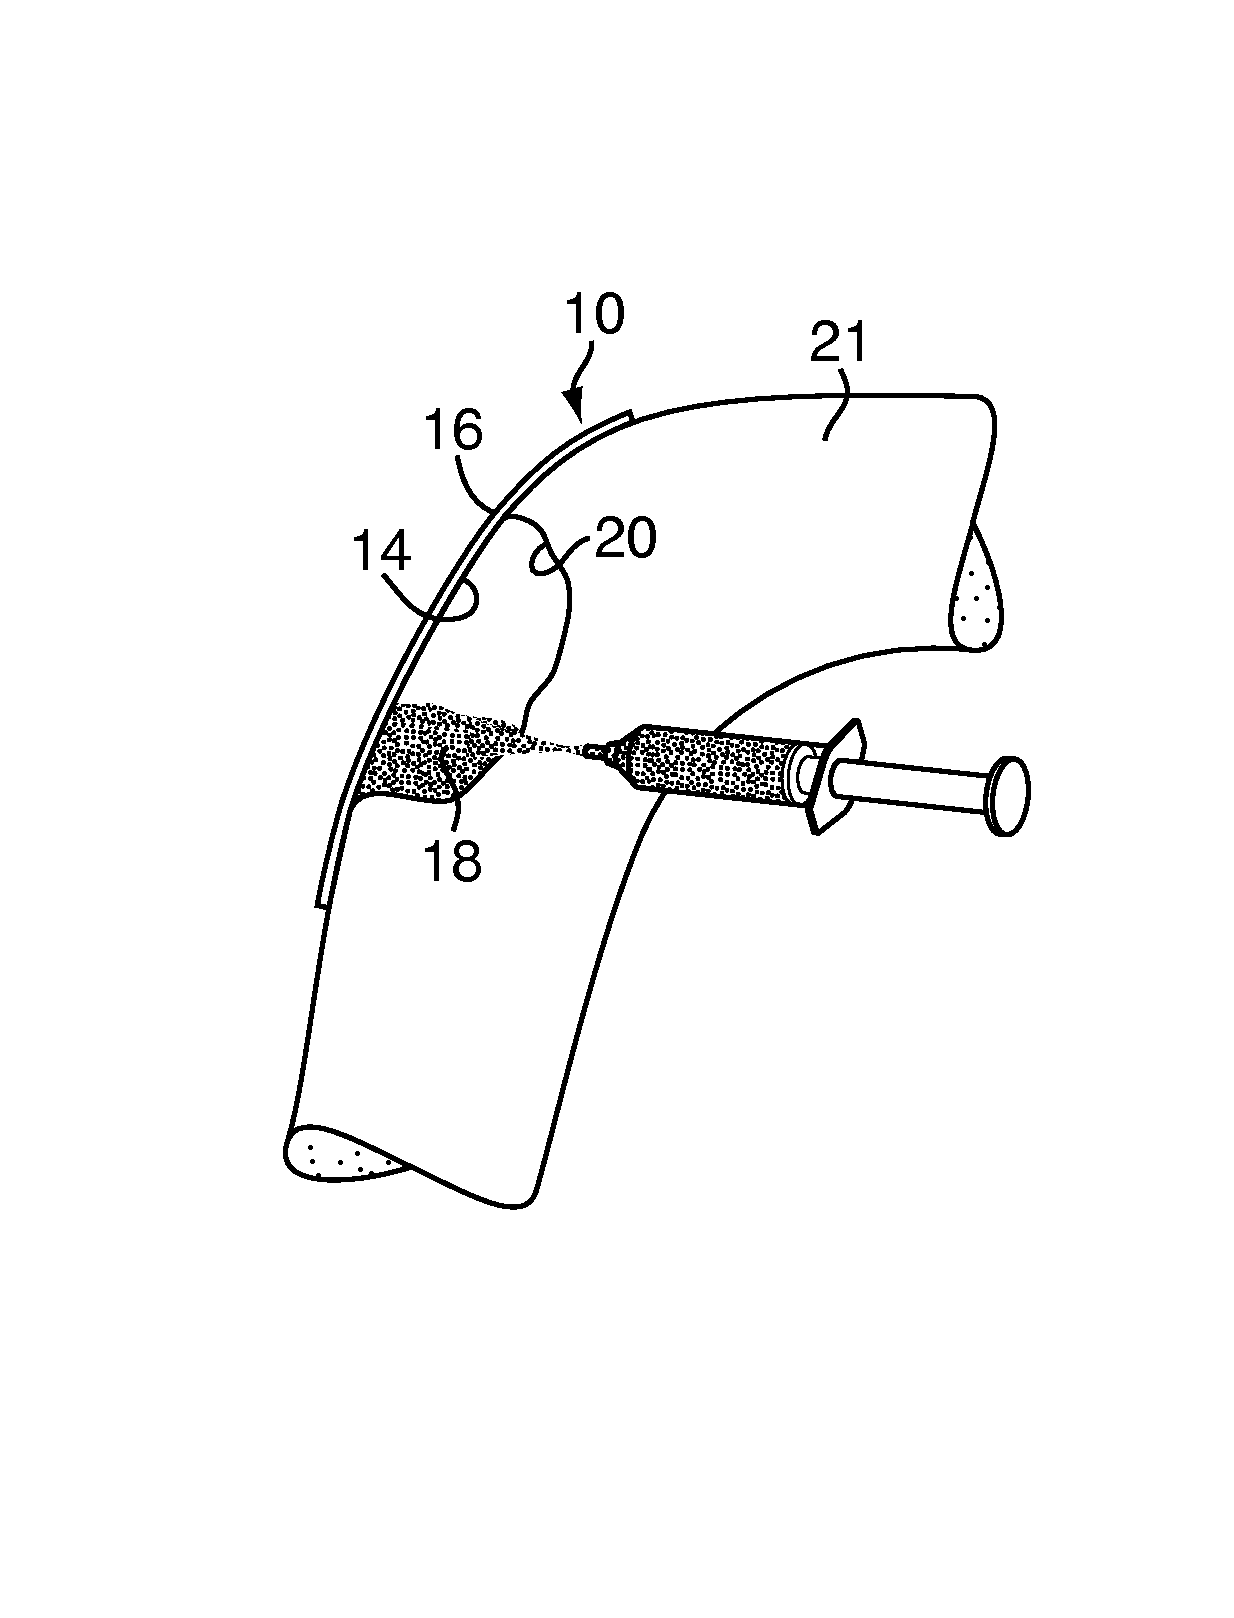 Method and device for handling bone adhesives